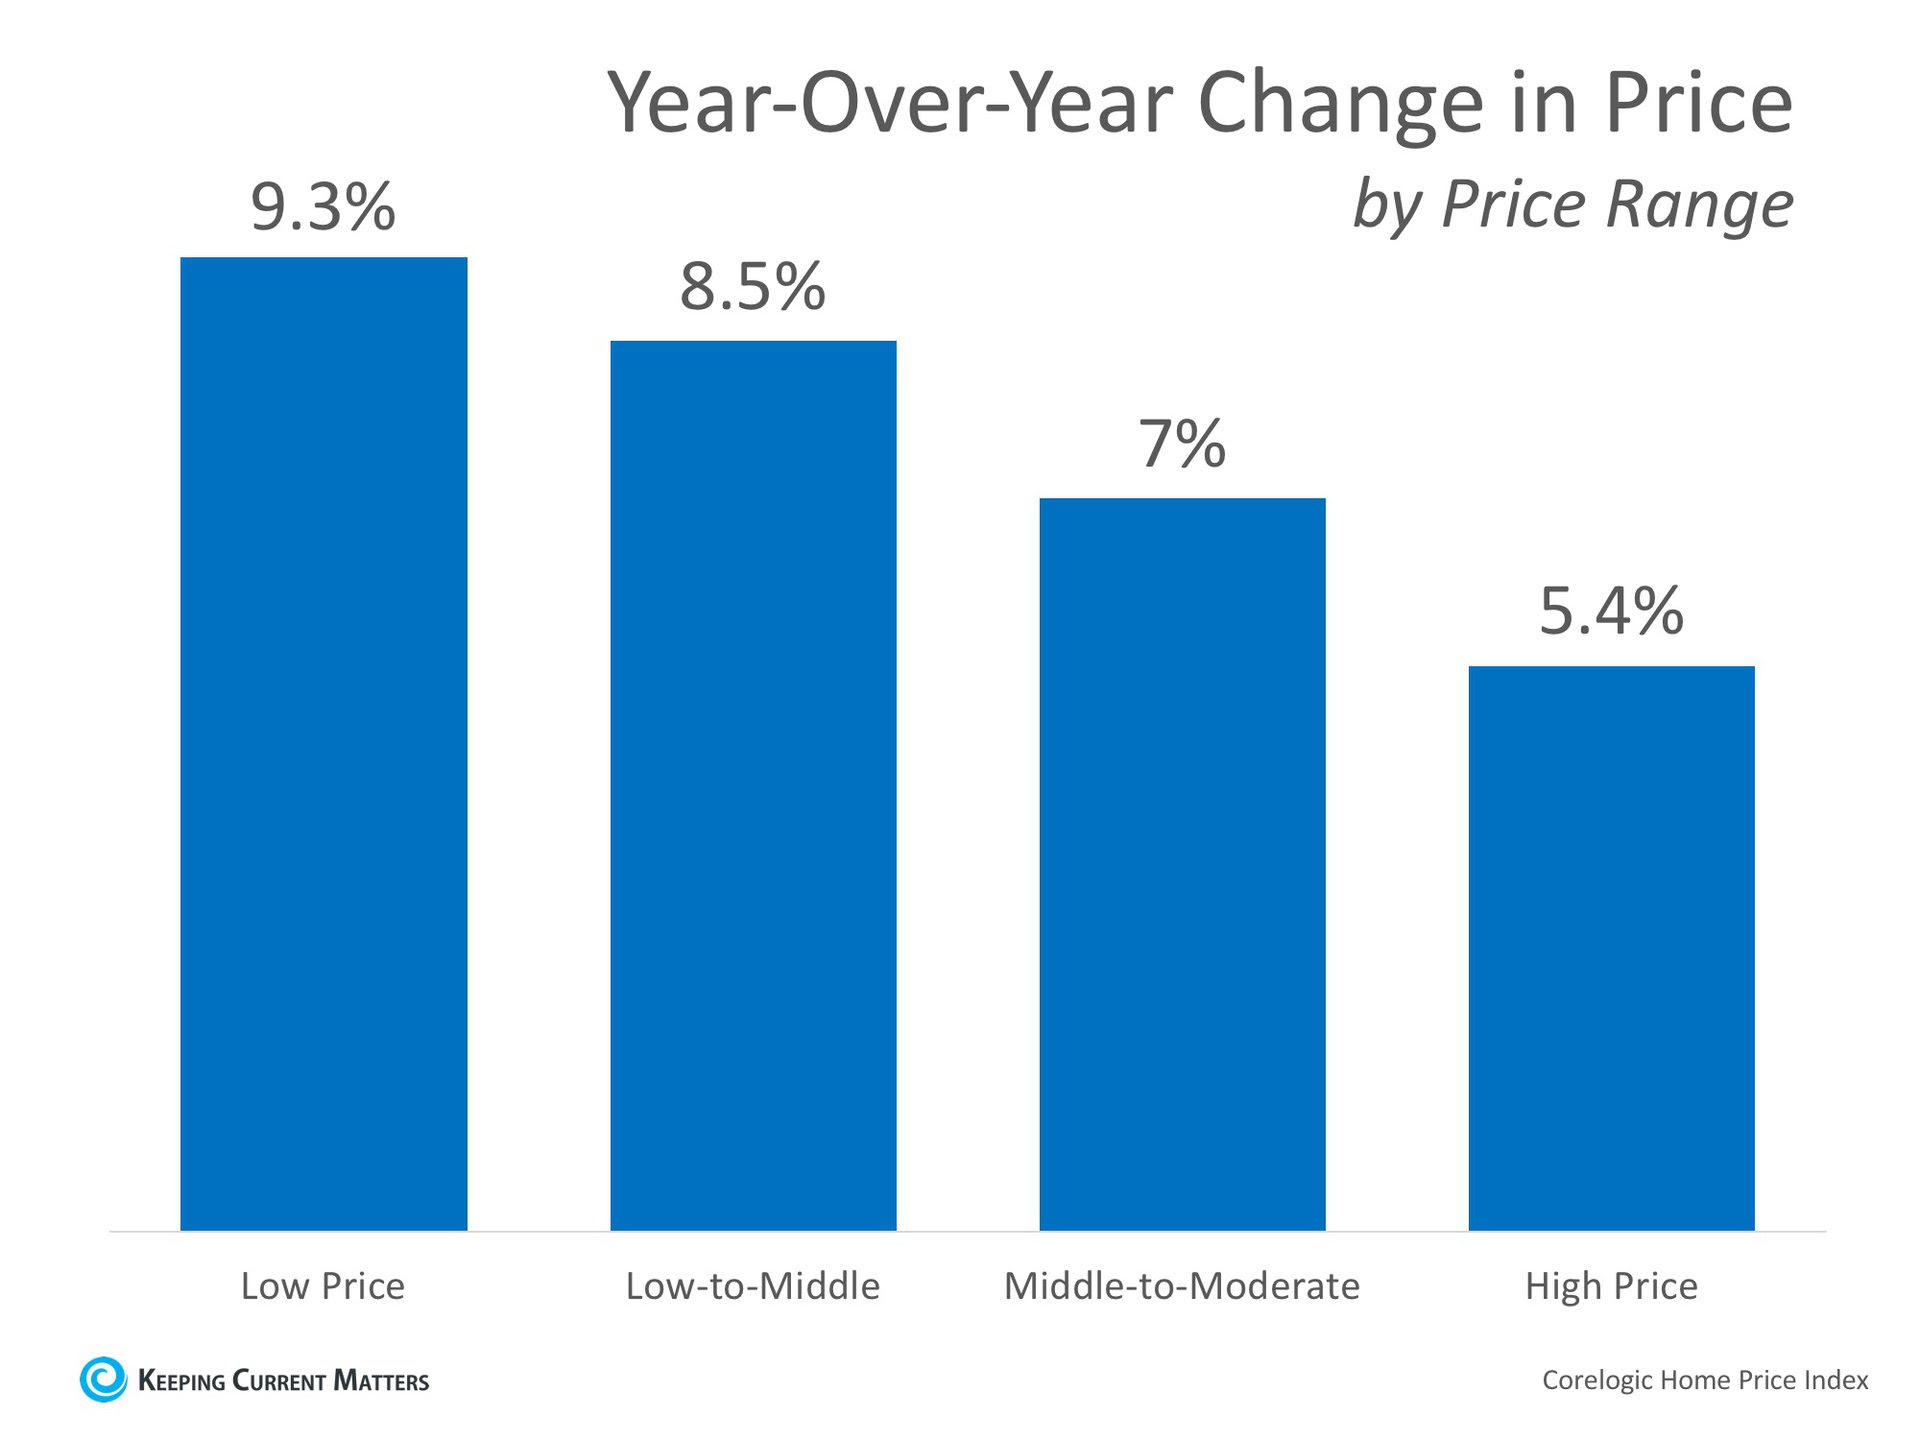 How Much Has Your Home Increased in Value Over the Last Year? | Keeping Current Matters